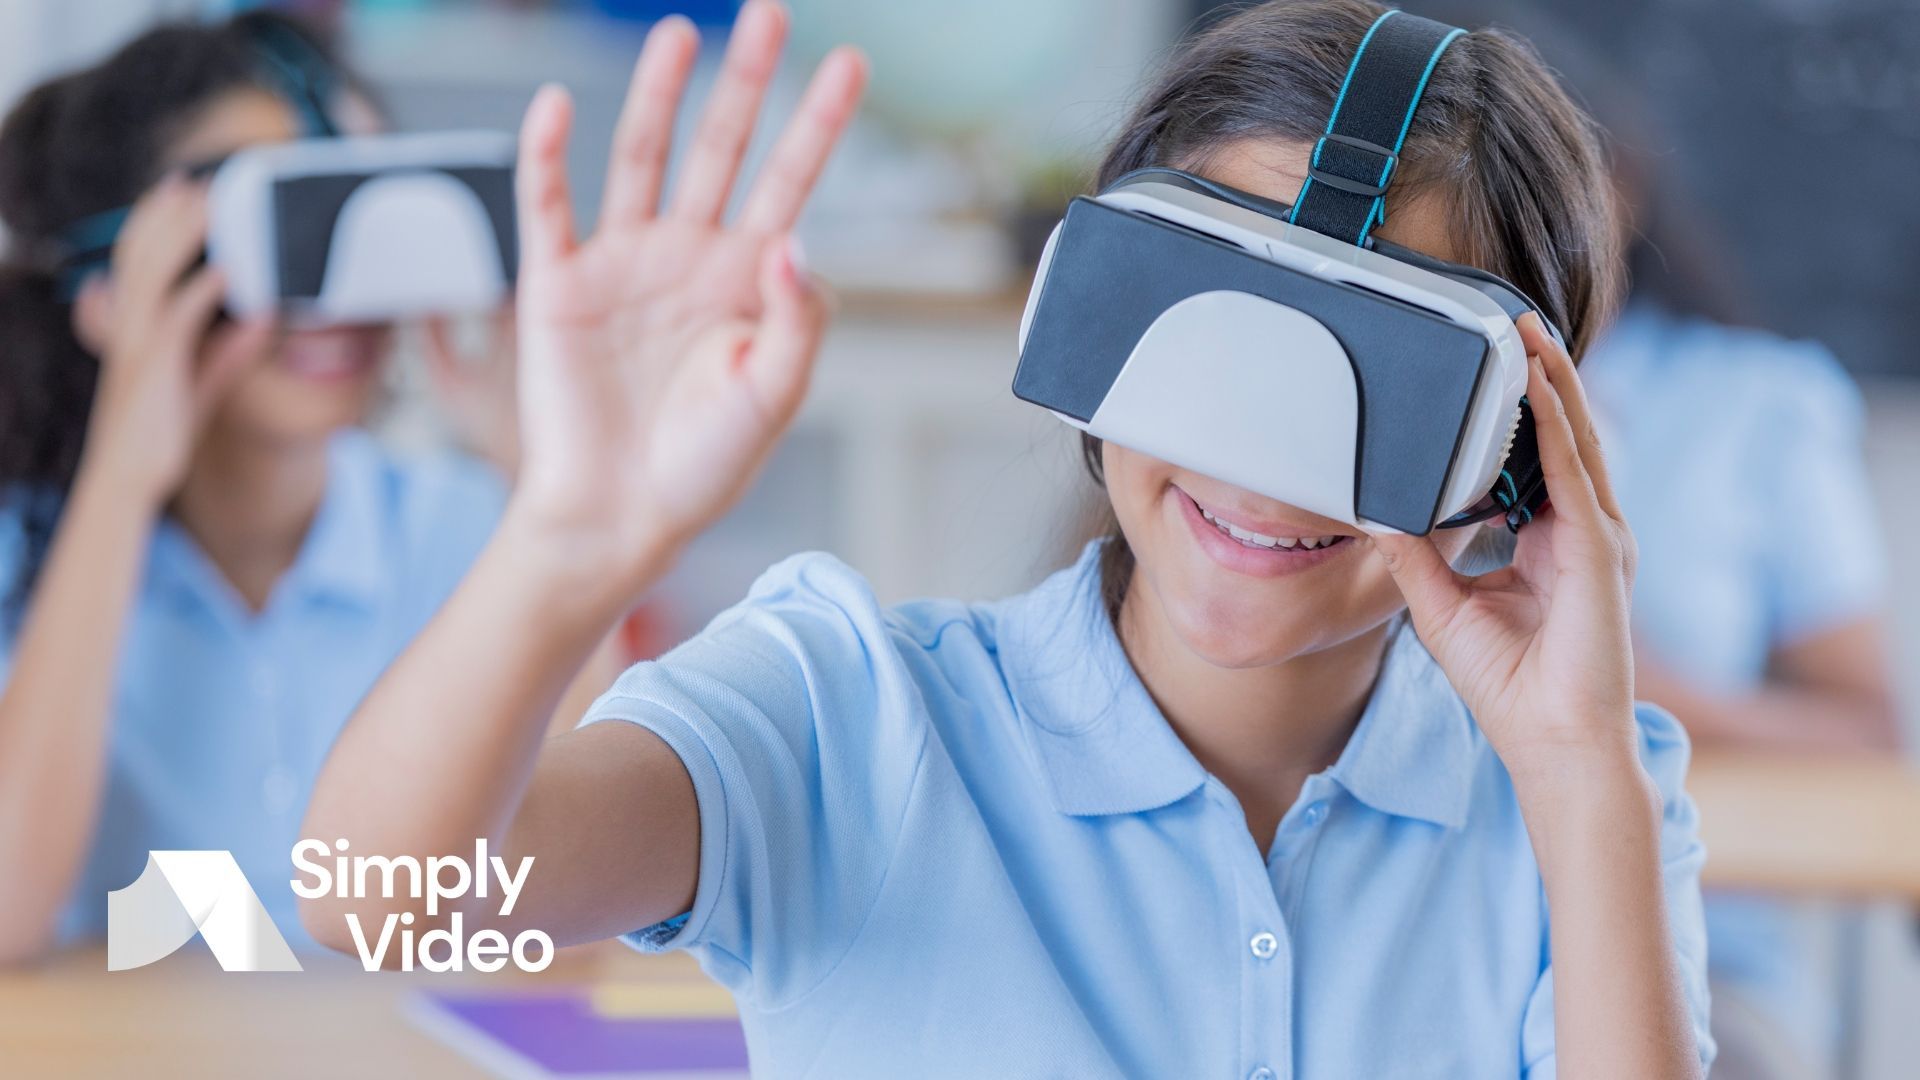 Want to make lessons more immersive and memorable? SimplyVideo Stage uses AR and VR to create virtual worlds and boost learning. Find out more.